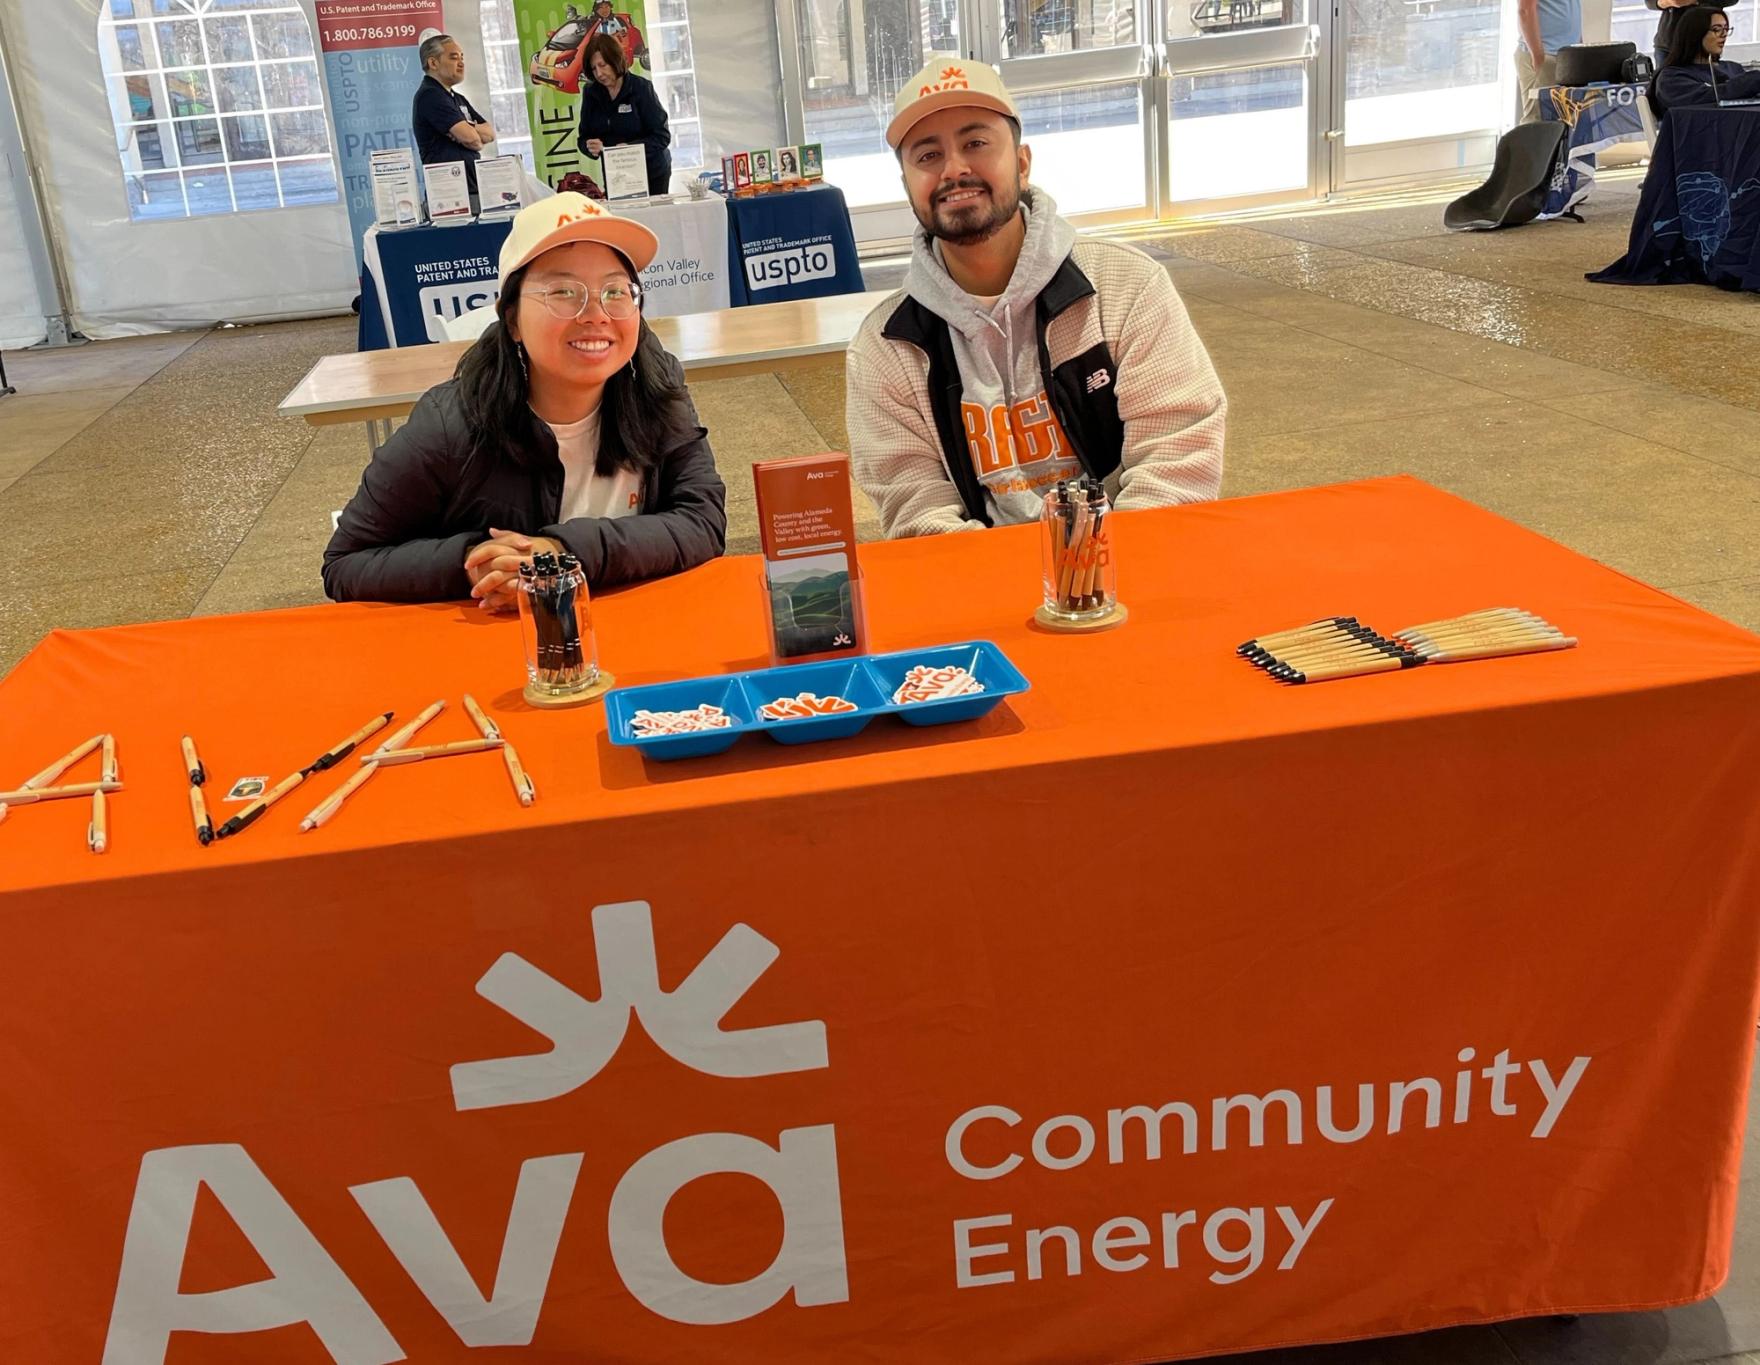 Two Ava employees tabling at an event